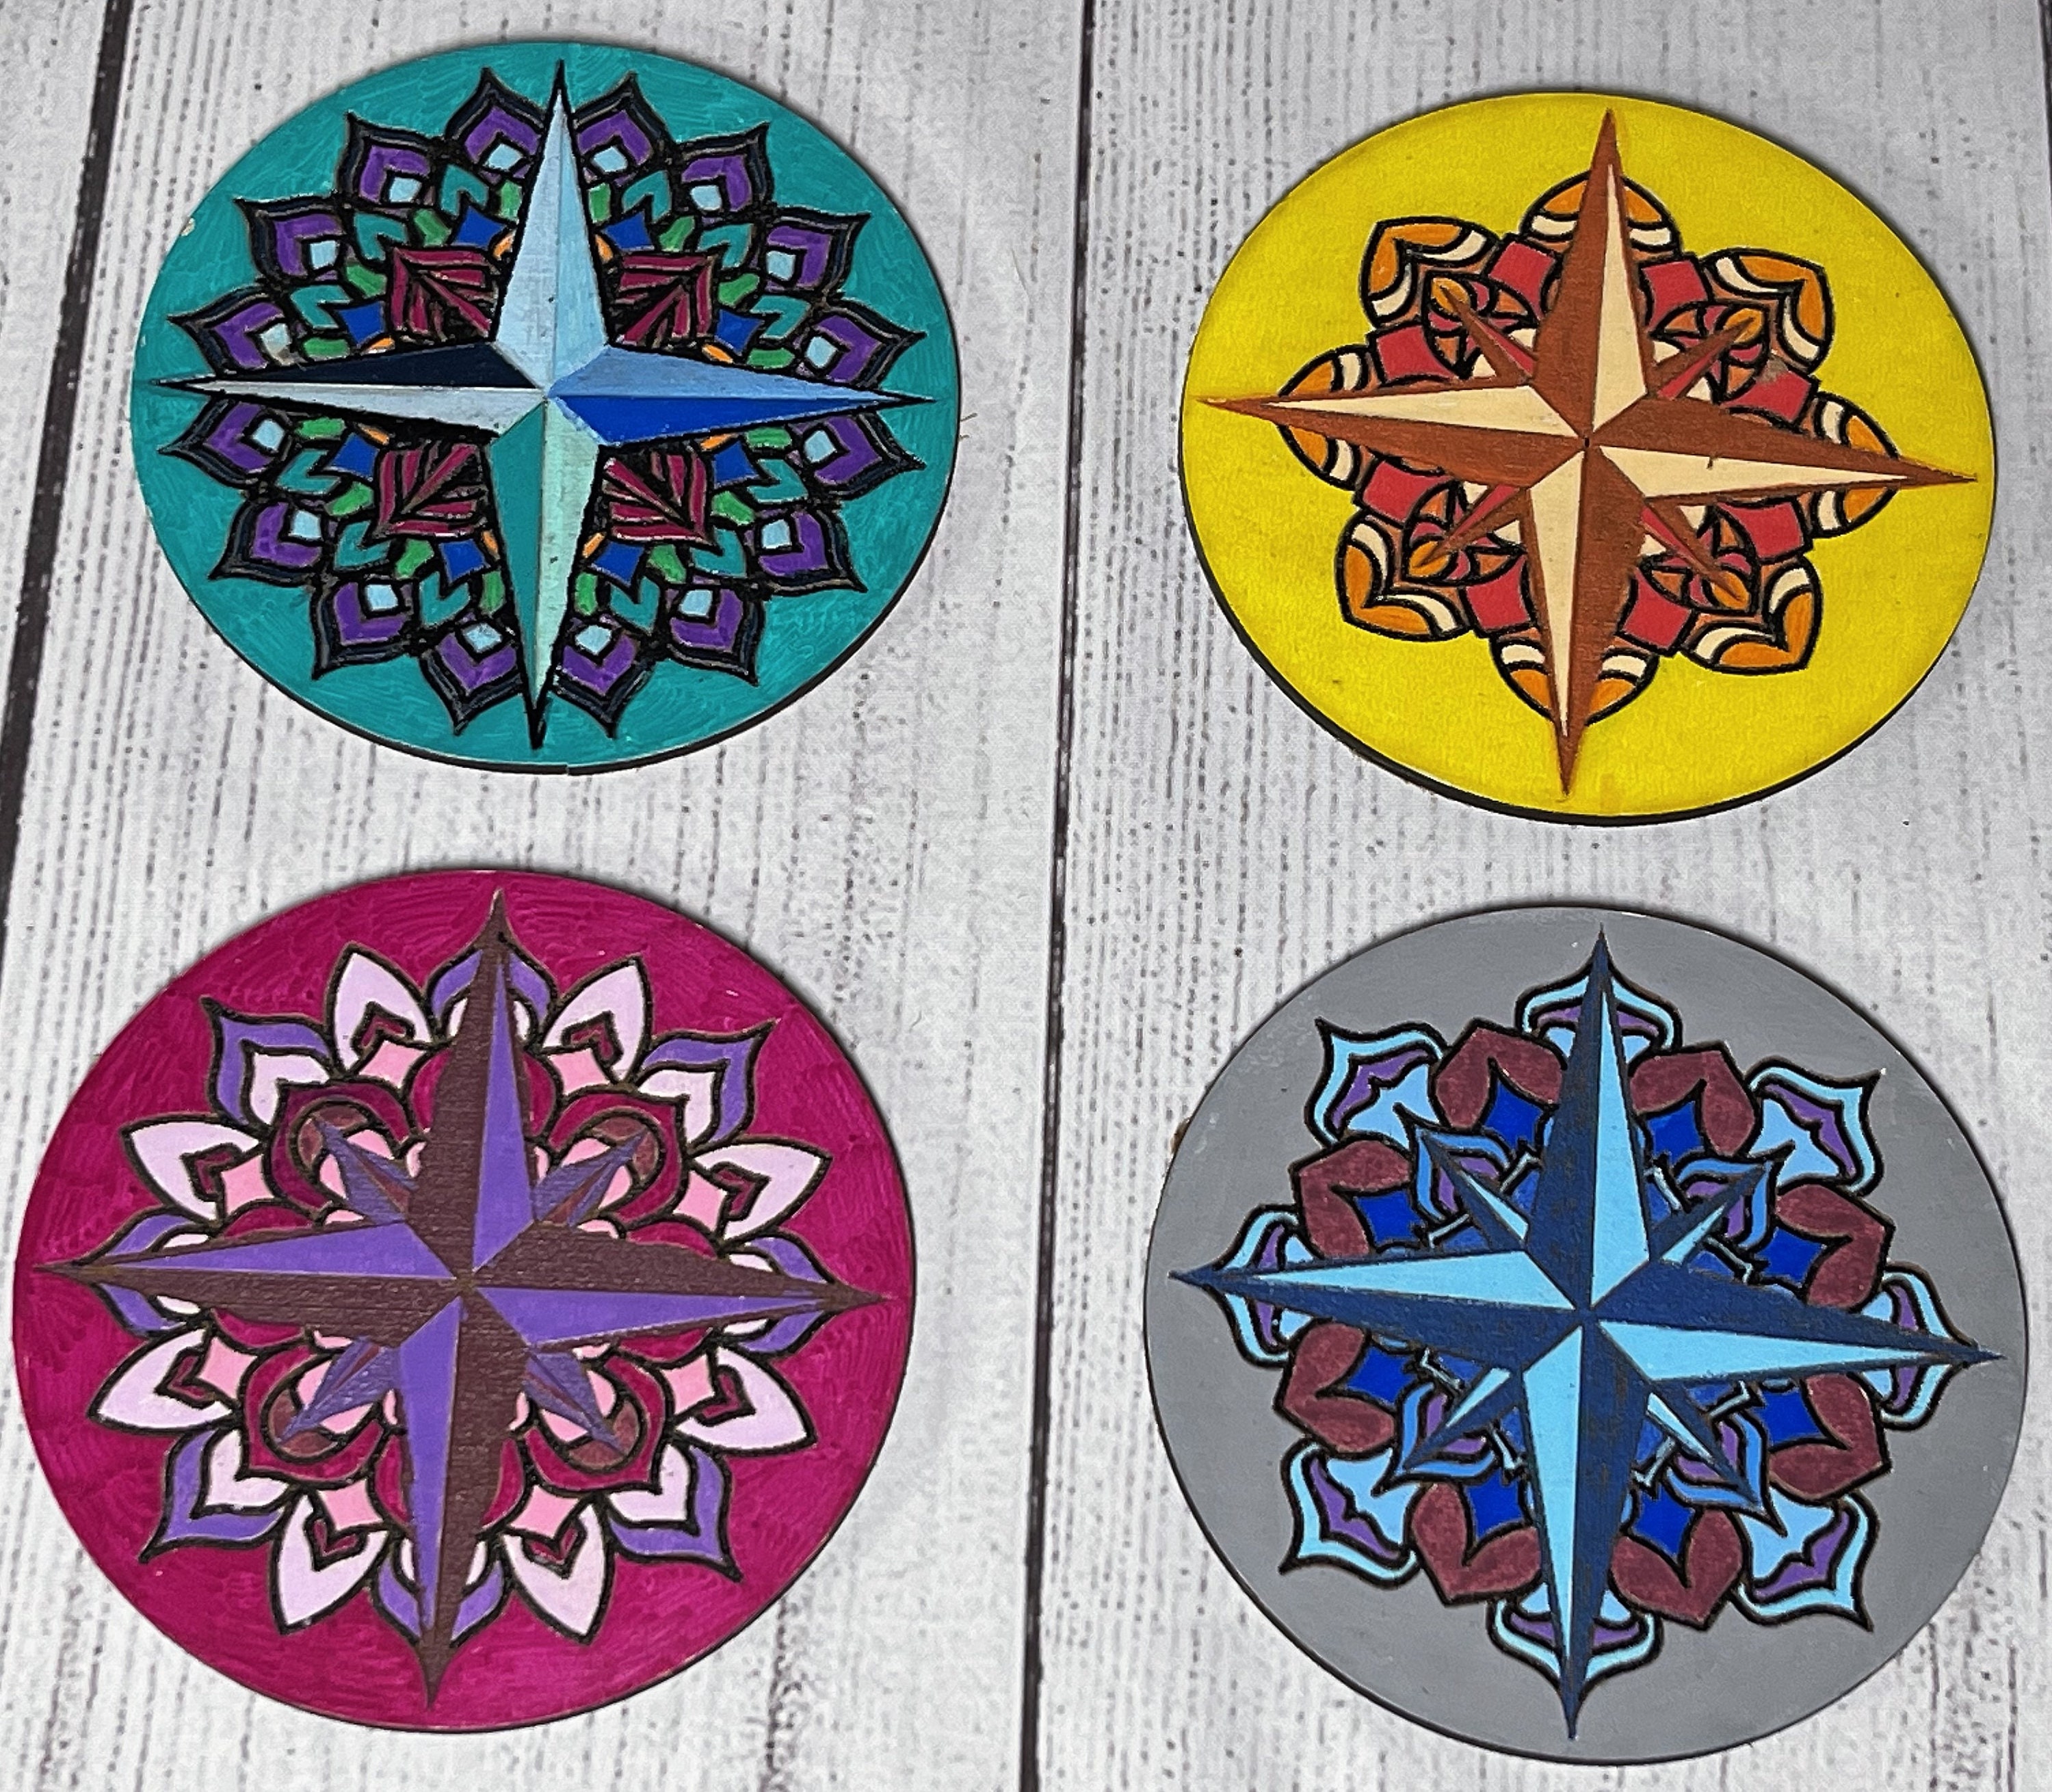 Mandala Art and Craft Kit With Mandala Art Tools Kit Gift for Girls 9-12  Age 12-14 Years Wooden Coasters With Acrylic Colours & Stand 